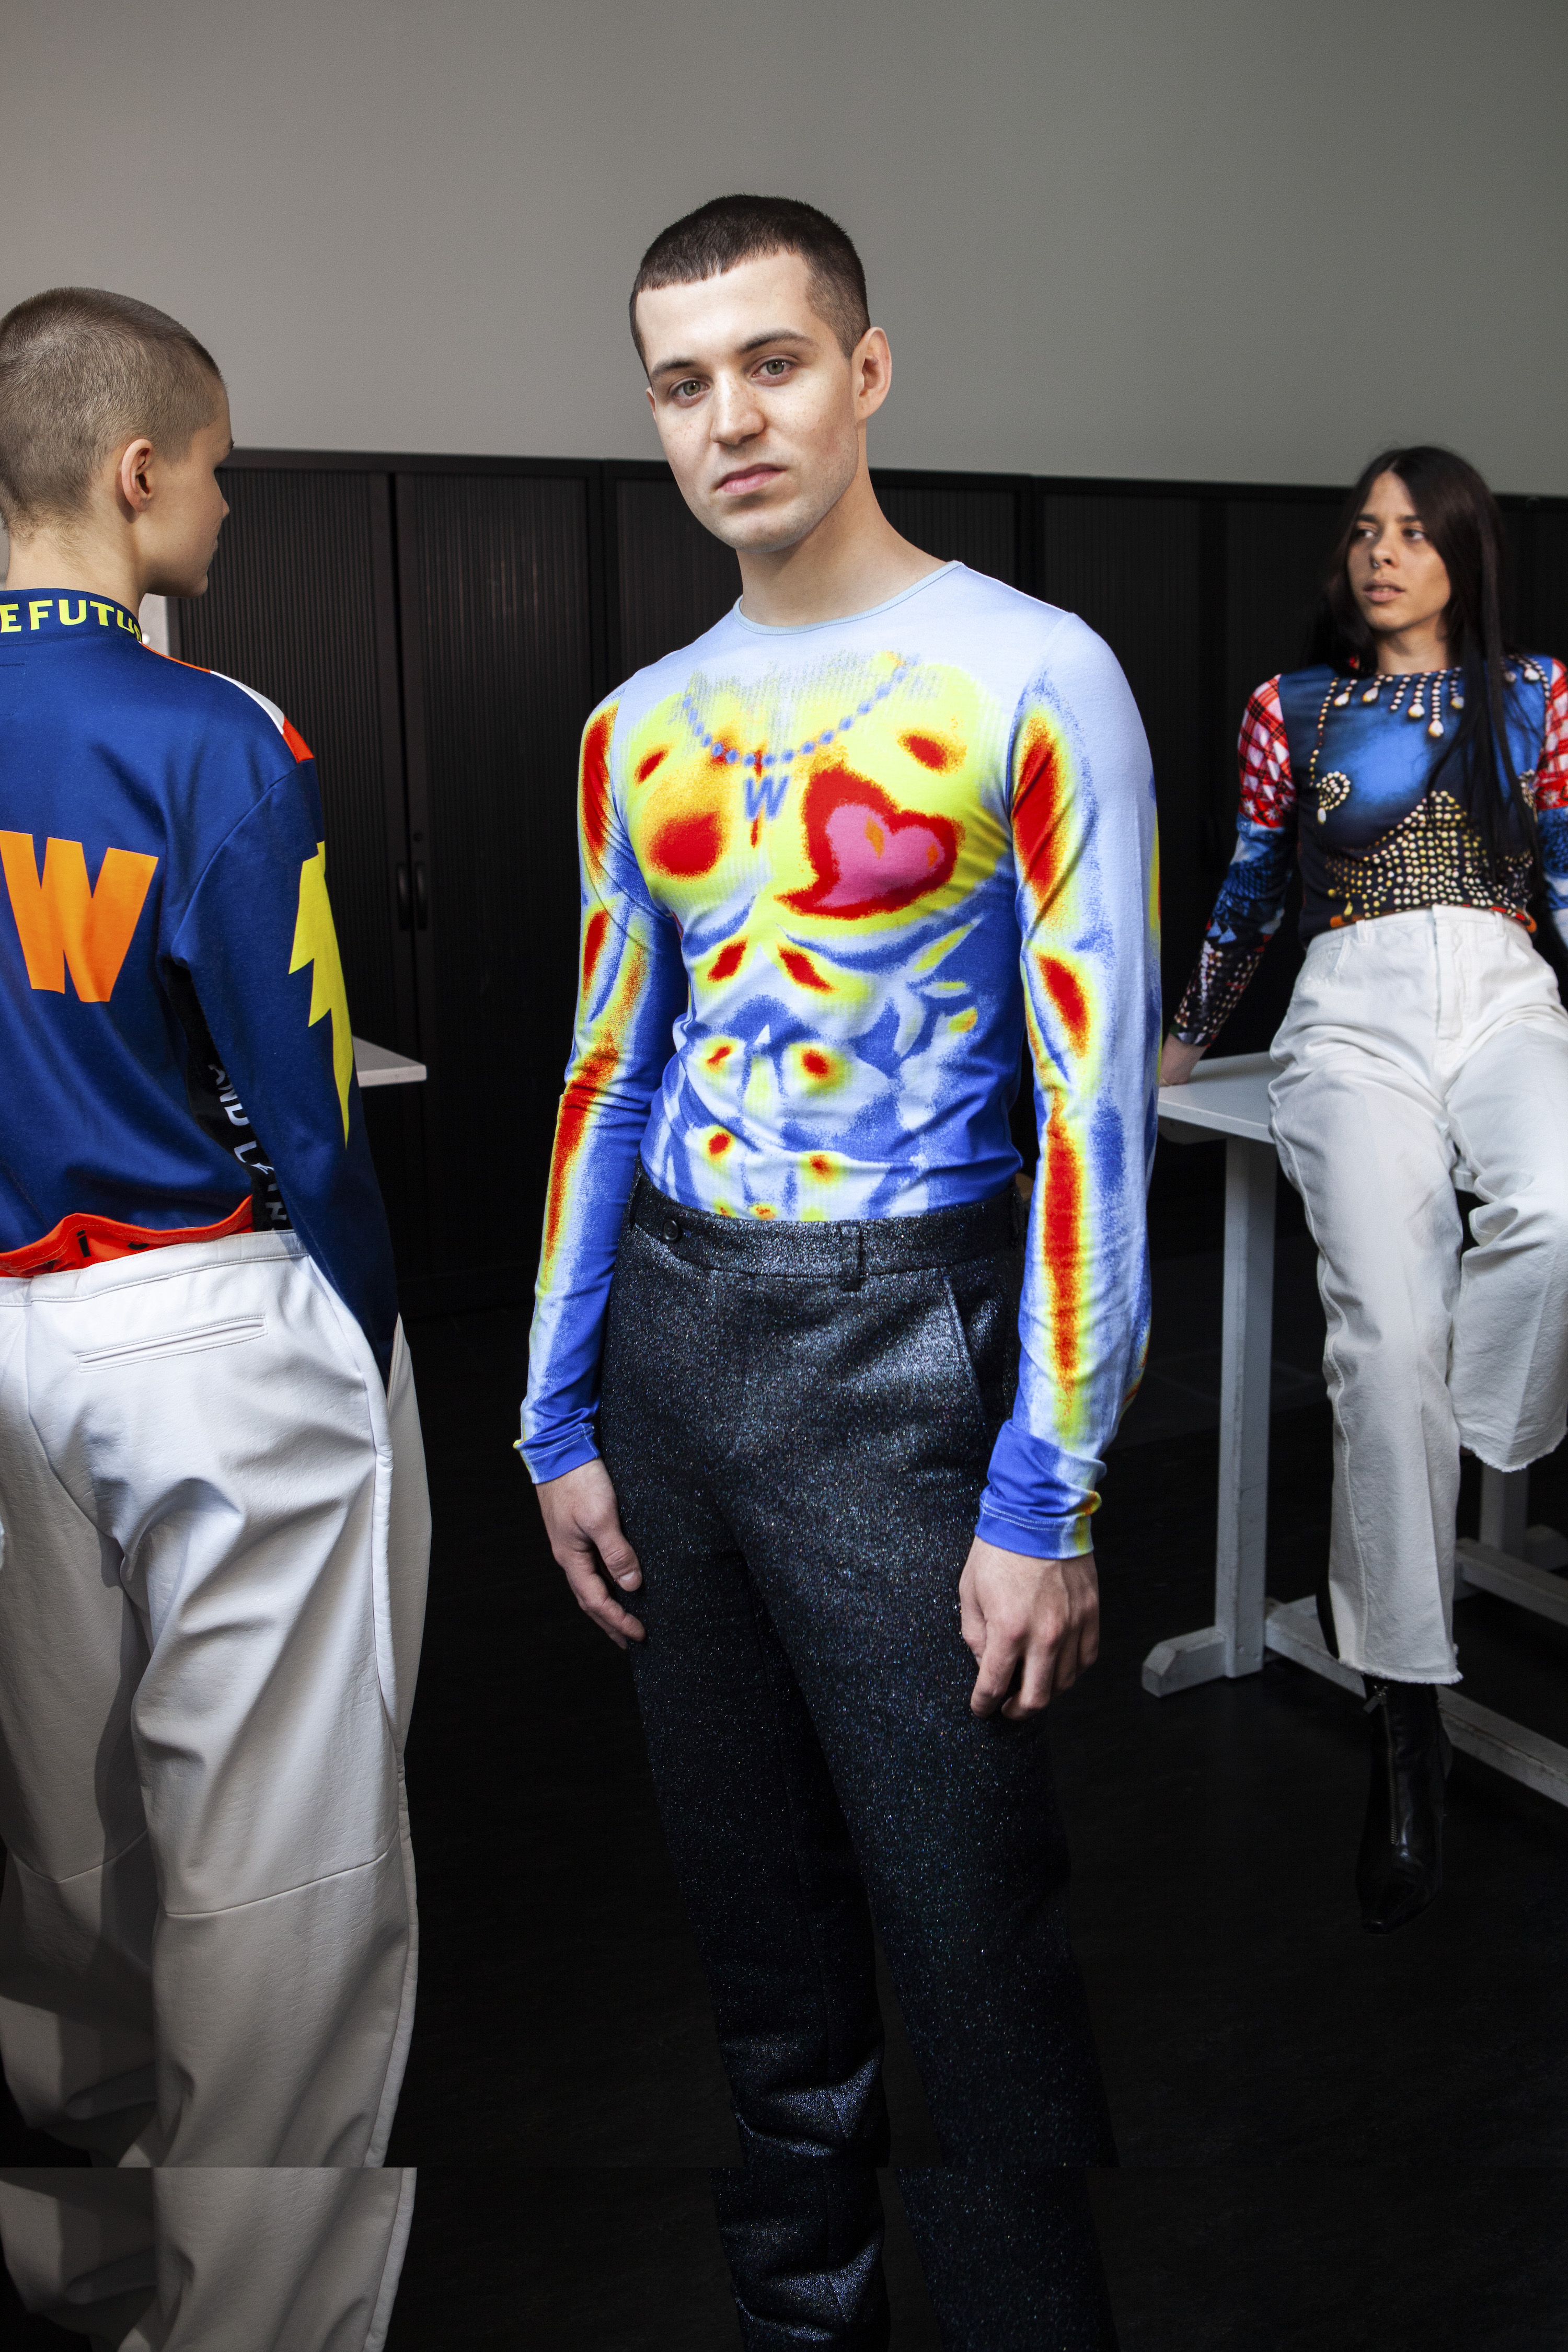 rediscover the sex and humour in walter van beirendonck's